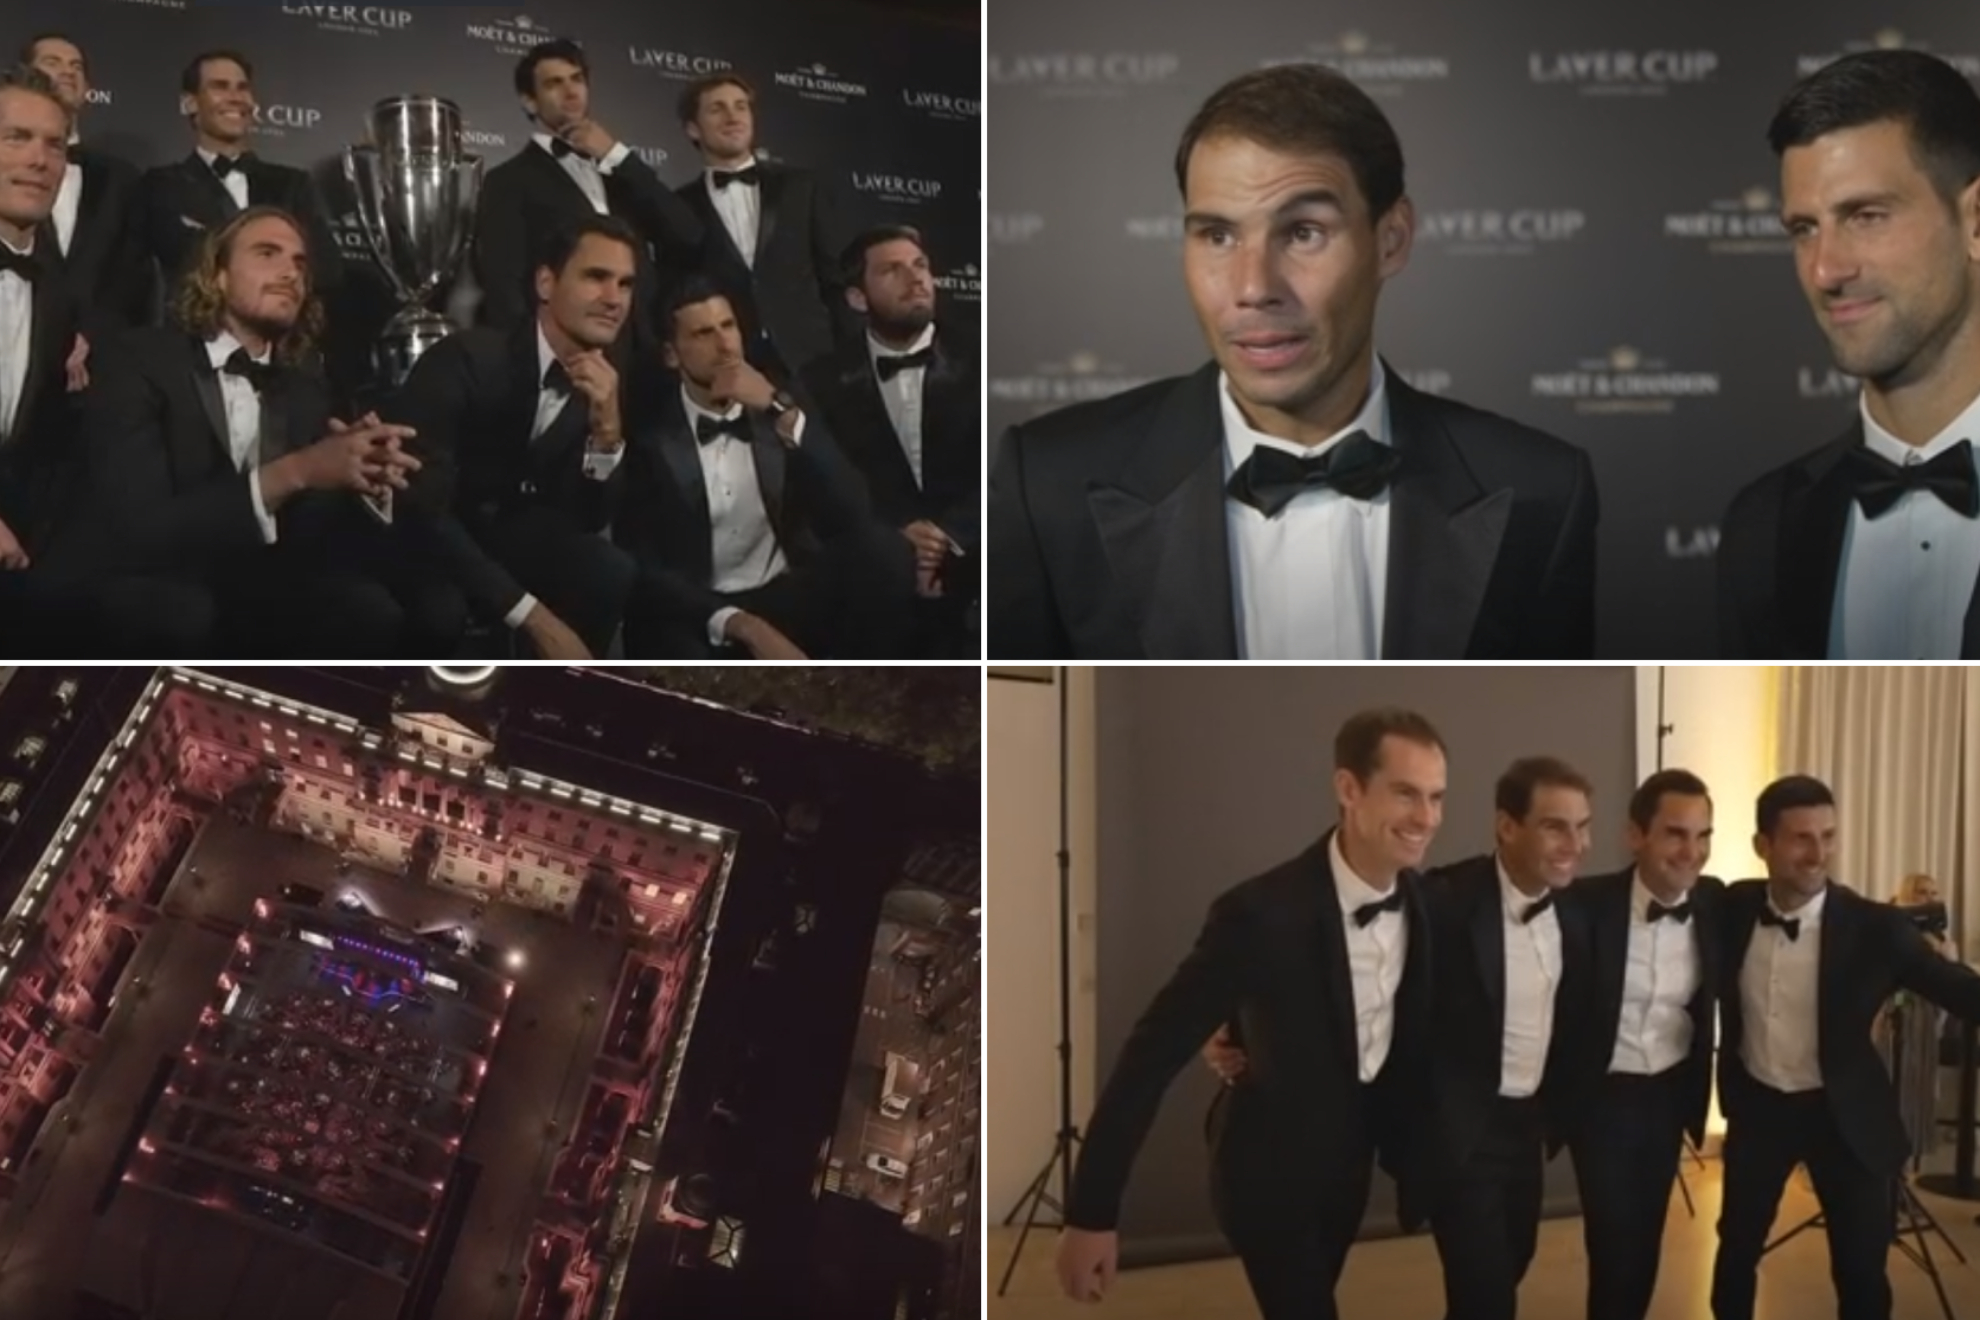 Behind the scenes at Roger Federers farewell party: Nadals gestures, emotional messages, and more unseen bits...